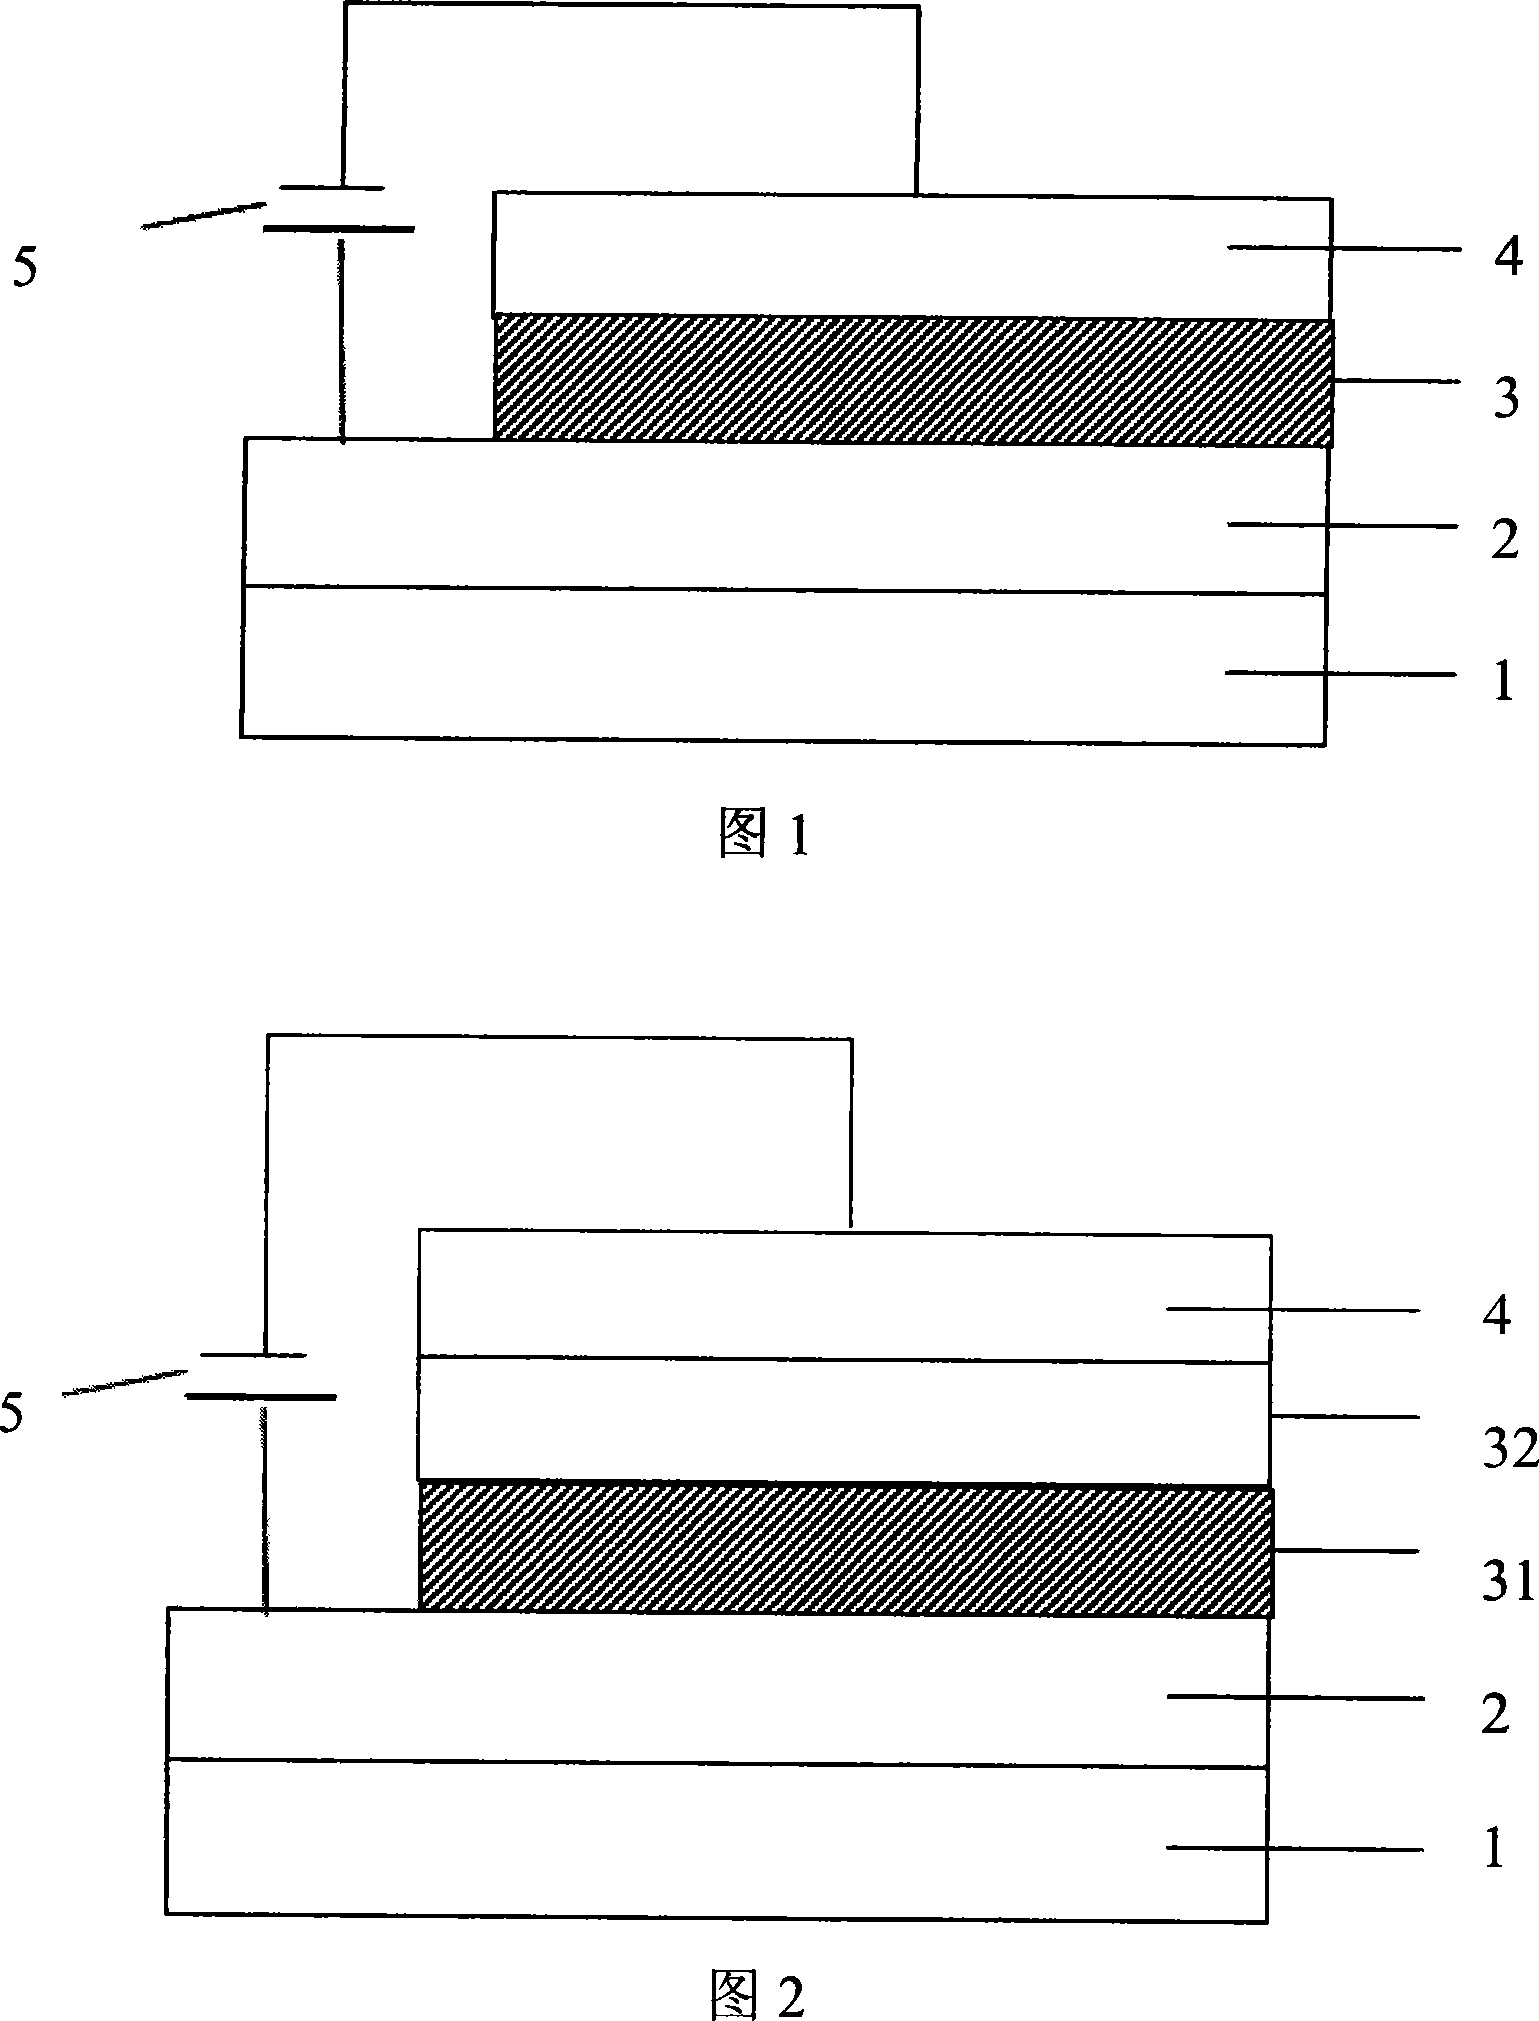 Organic electroluminescent device capable of emitting white light and method for fabricating the same